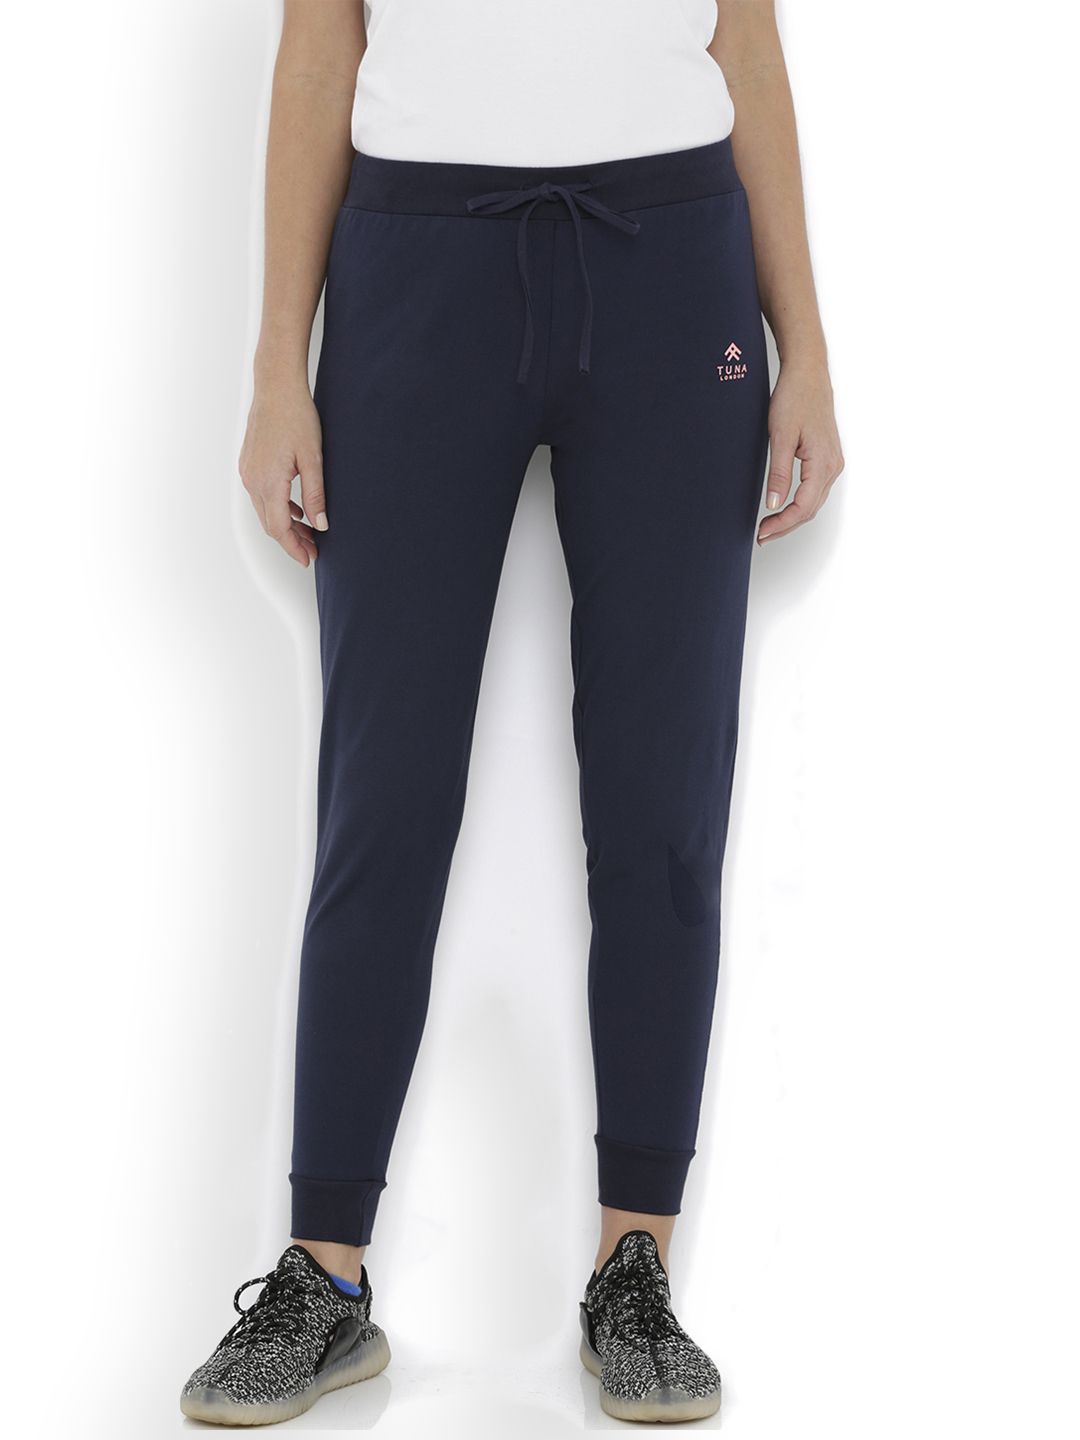 Tuna London Navy Blue Joggers Price in India